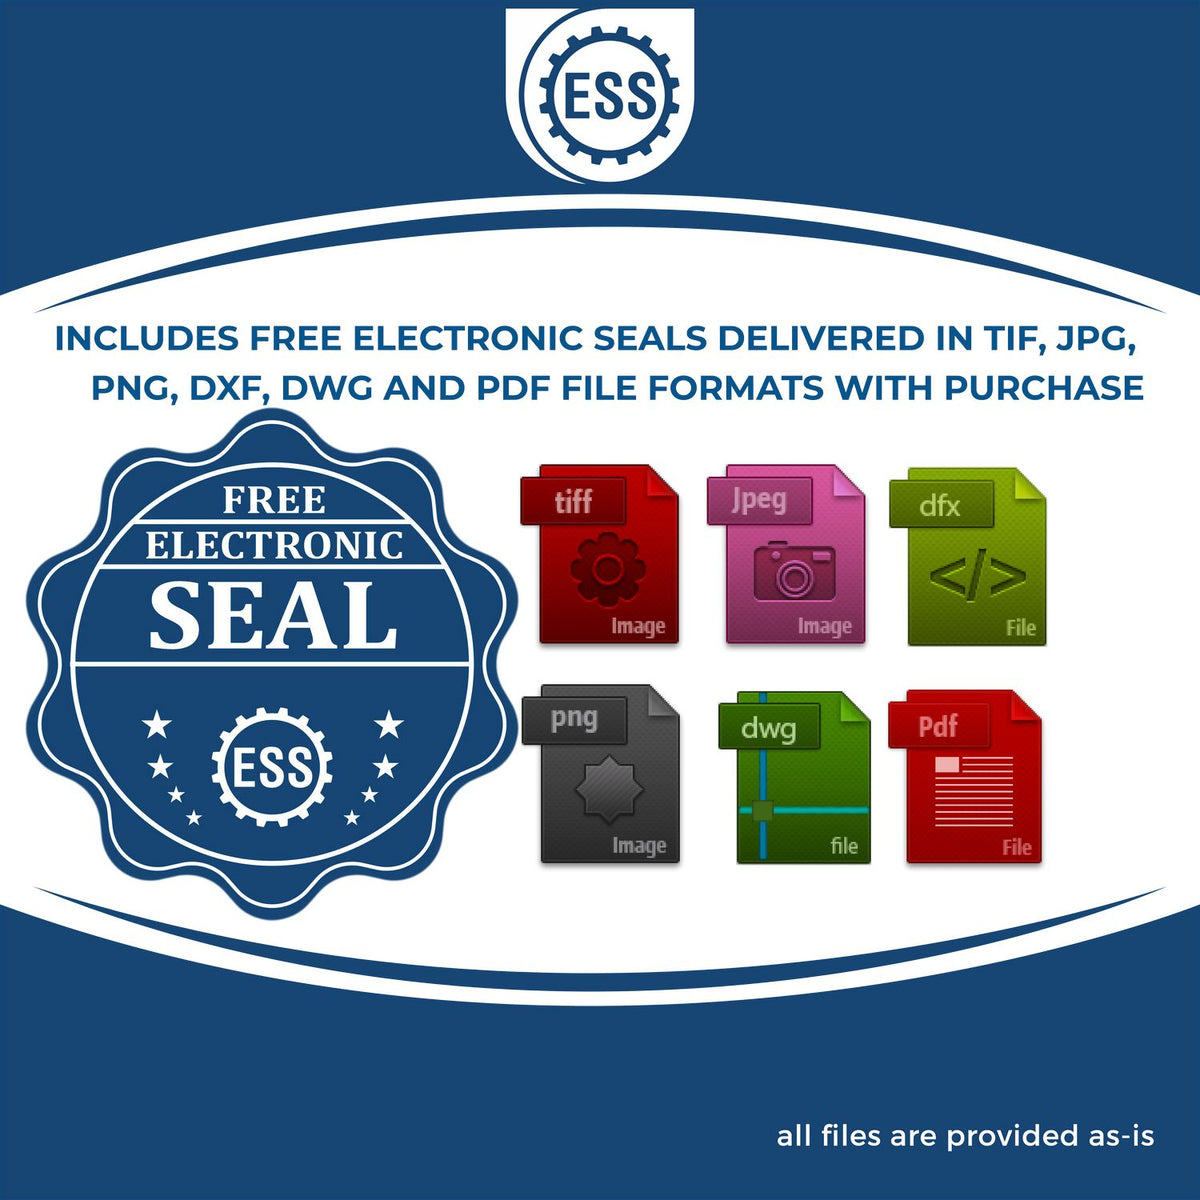 An infographic for the free electronic seal for the Slim Pre-Inked Alaska Landscape Architect Seal Stamp illustrating the different file type icons such as DXF, DWG, TIF, JPG and PNG.